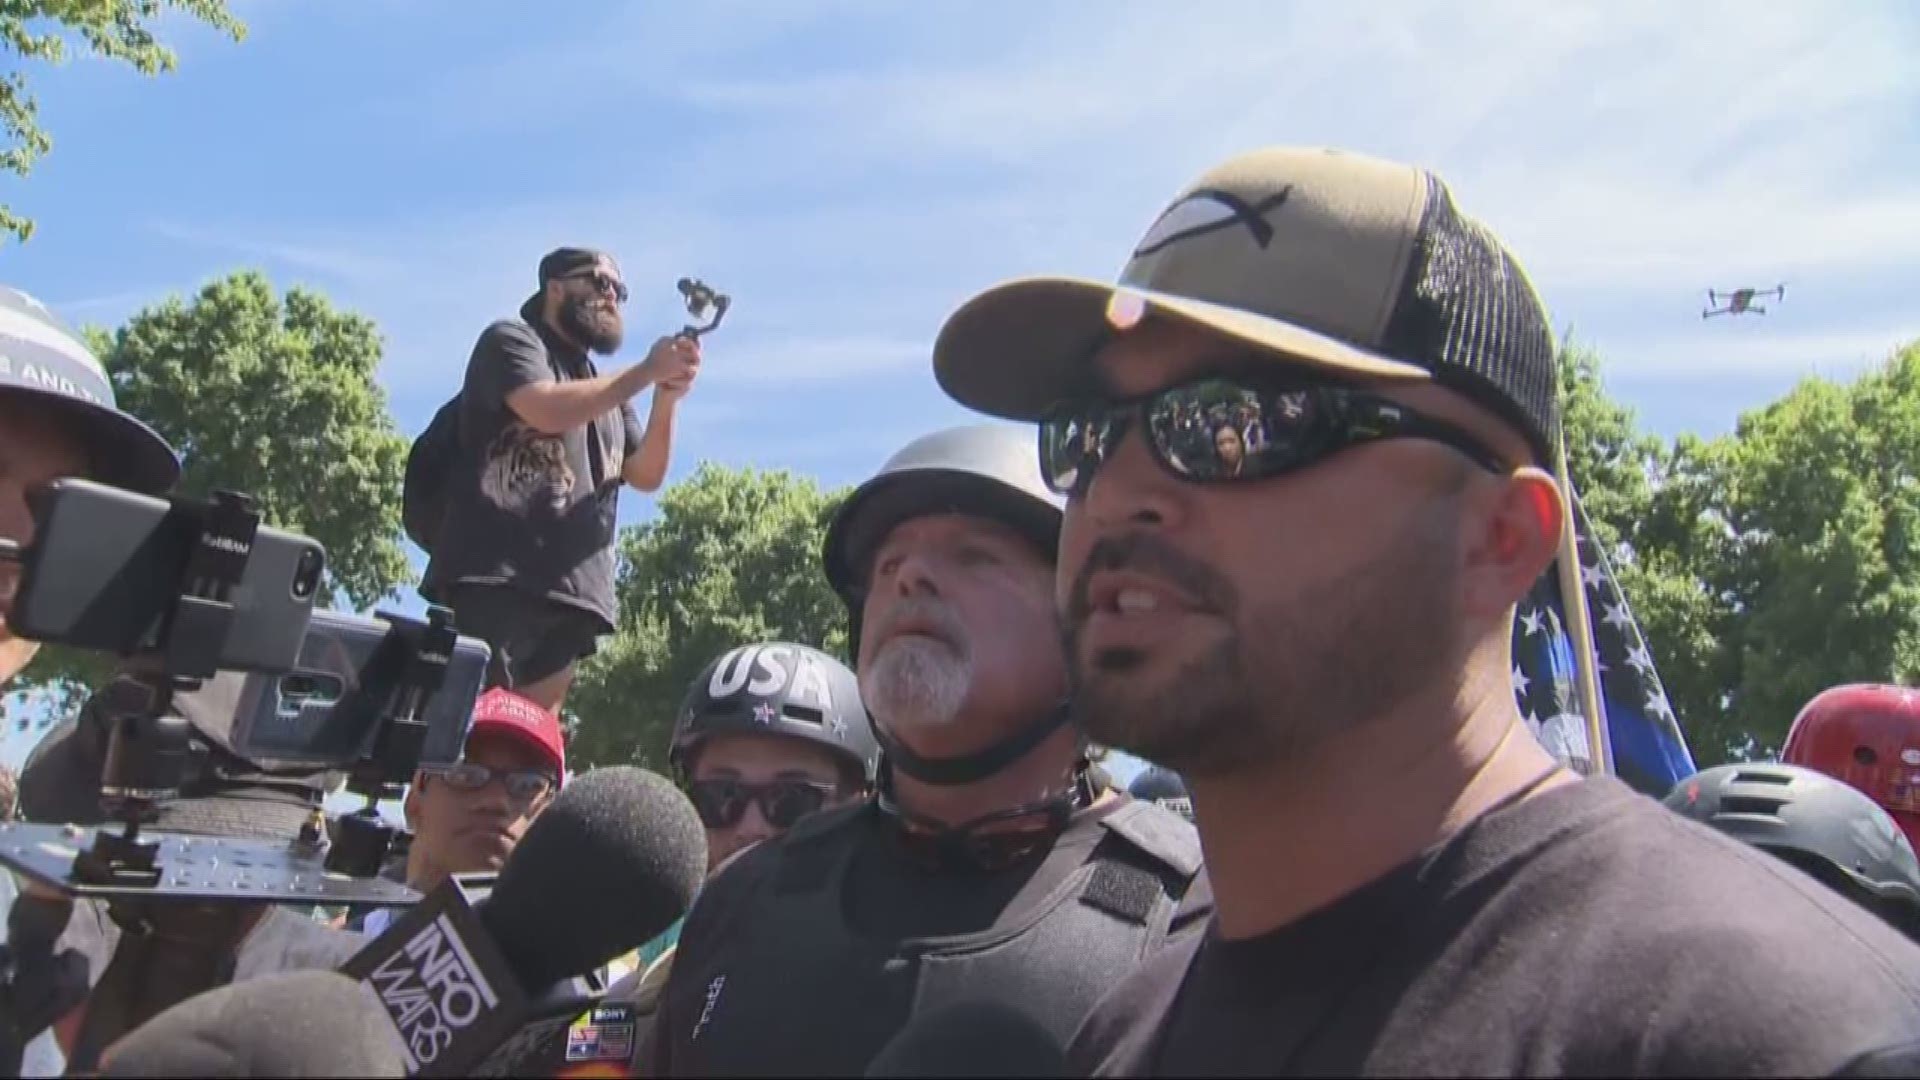 Portland’s mayor is calling for an investigation into texts between police and the leader of the right-wing Patriot Prayer group.